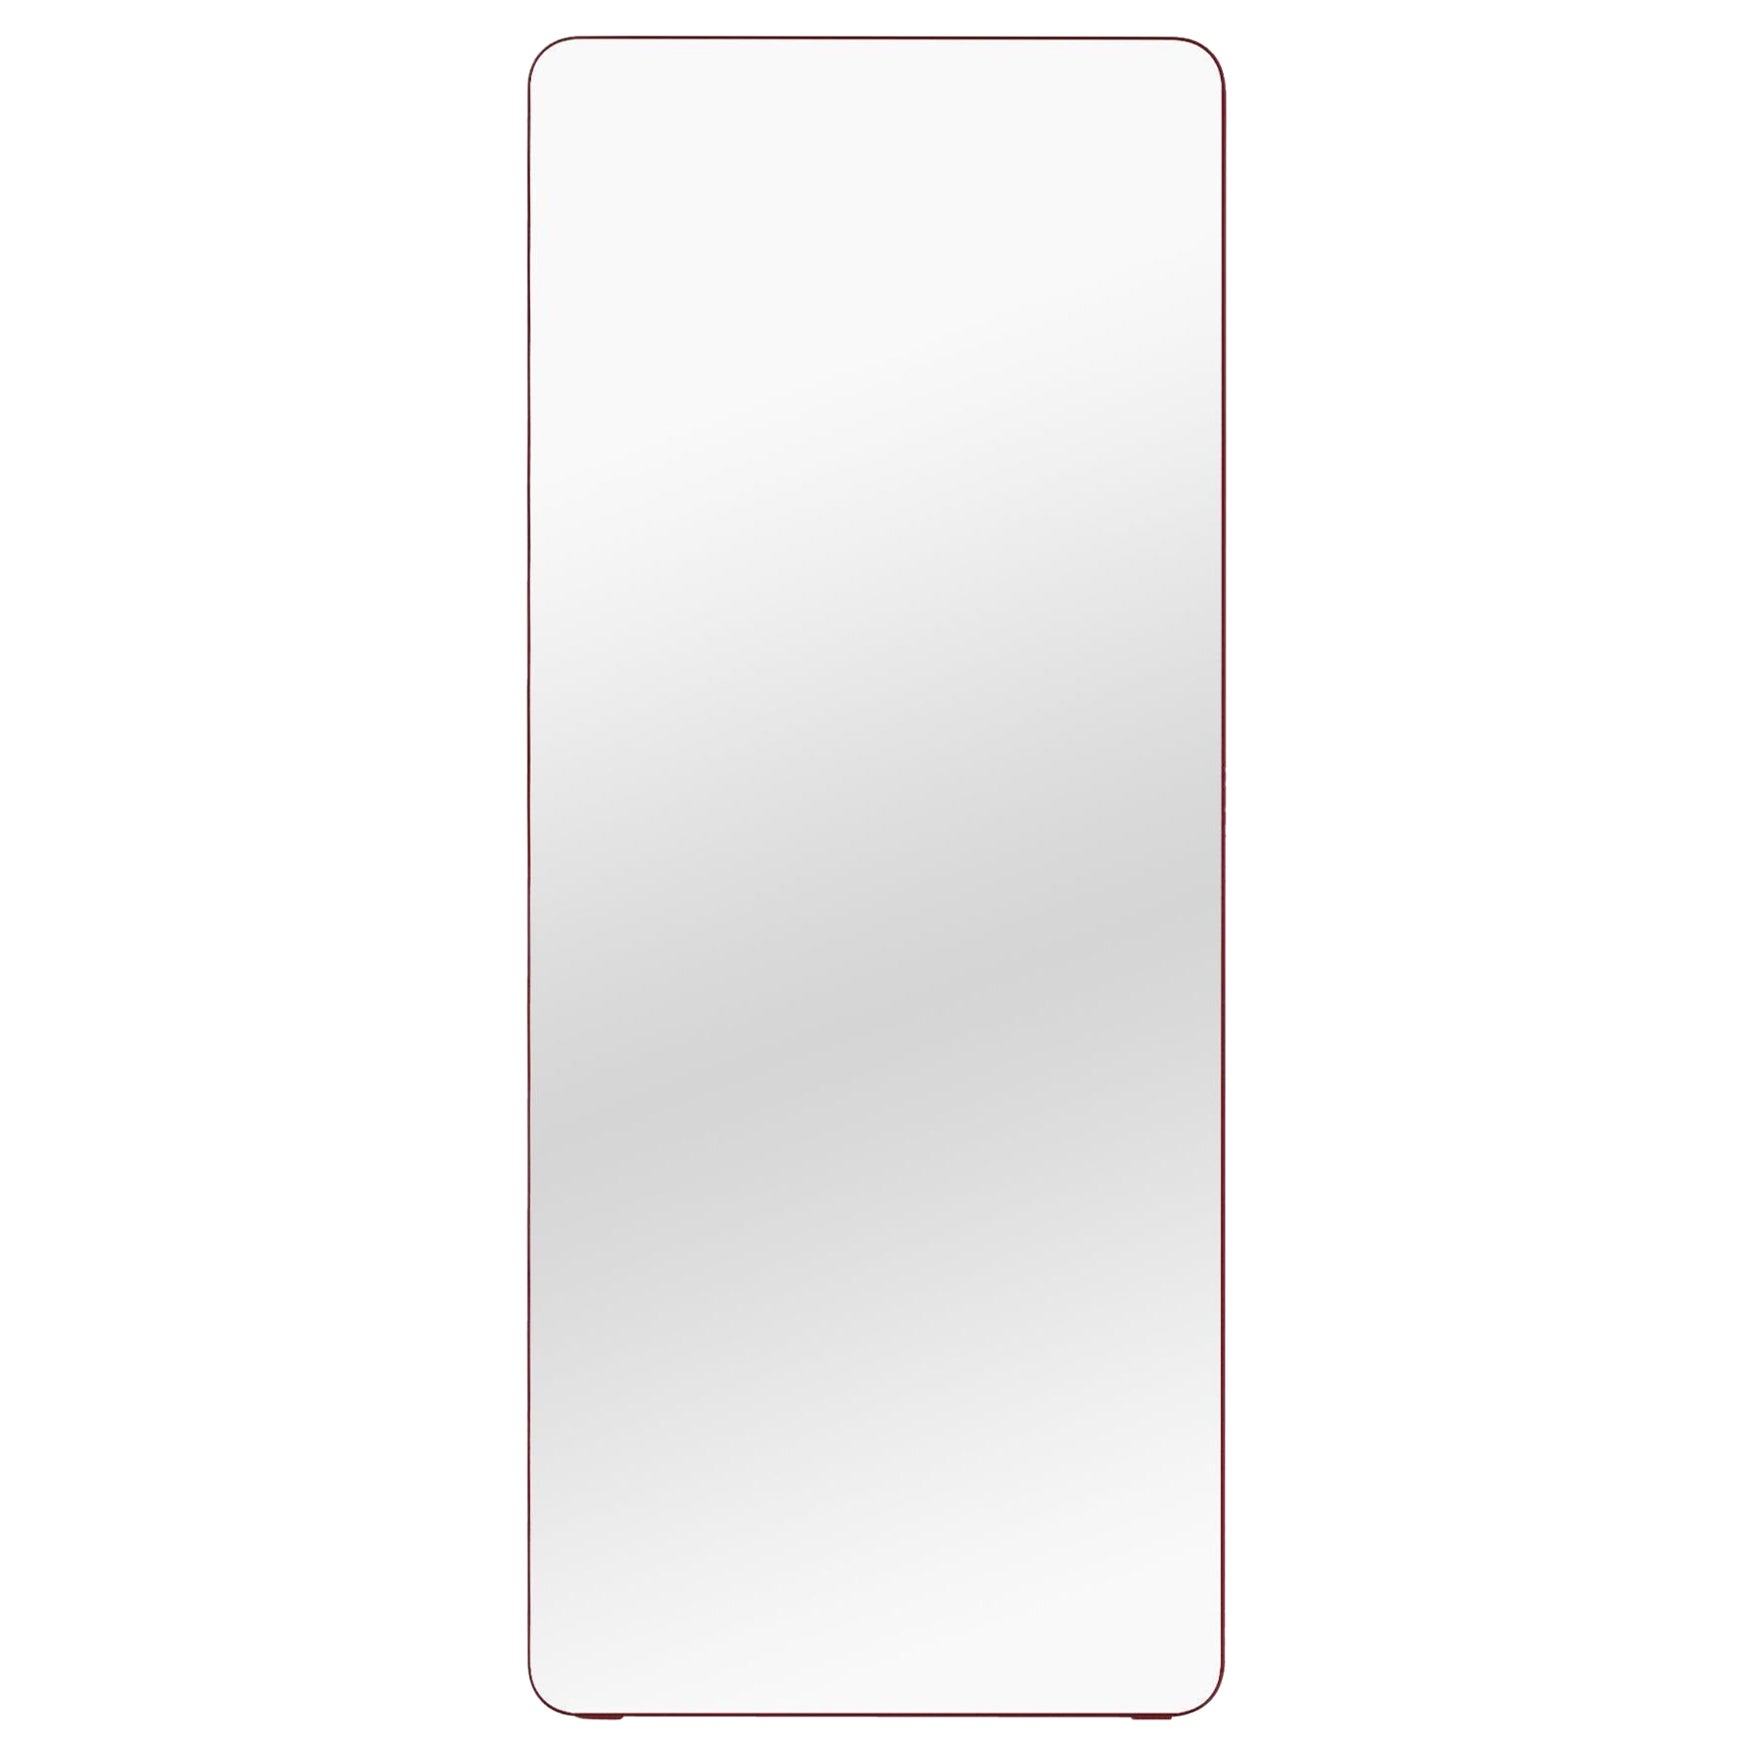 Contemporary Mirror 'Loveself 05' by Oitoproducts, Dark Red Frame